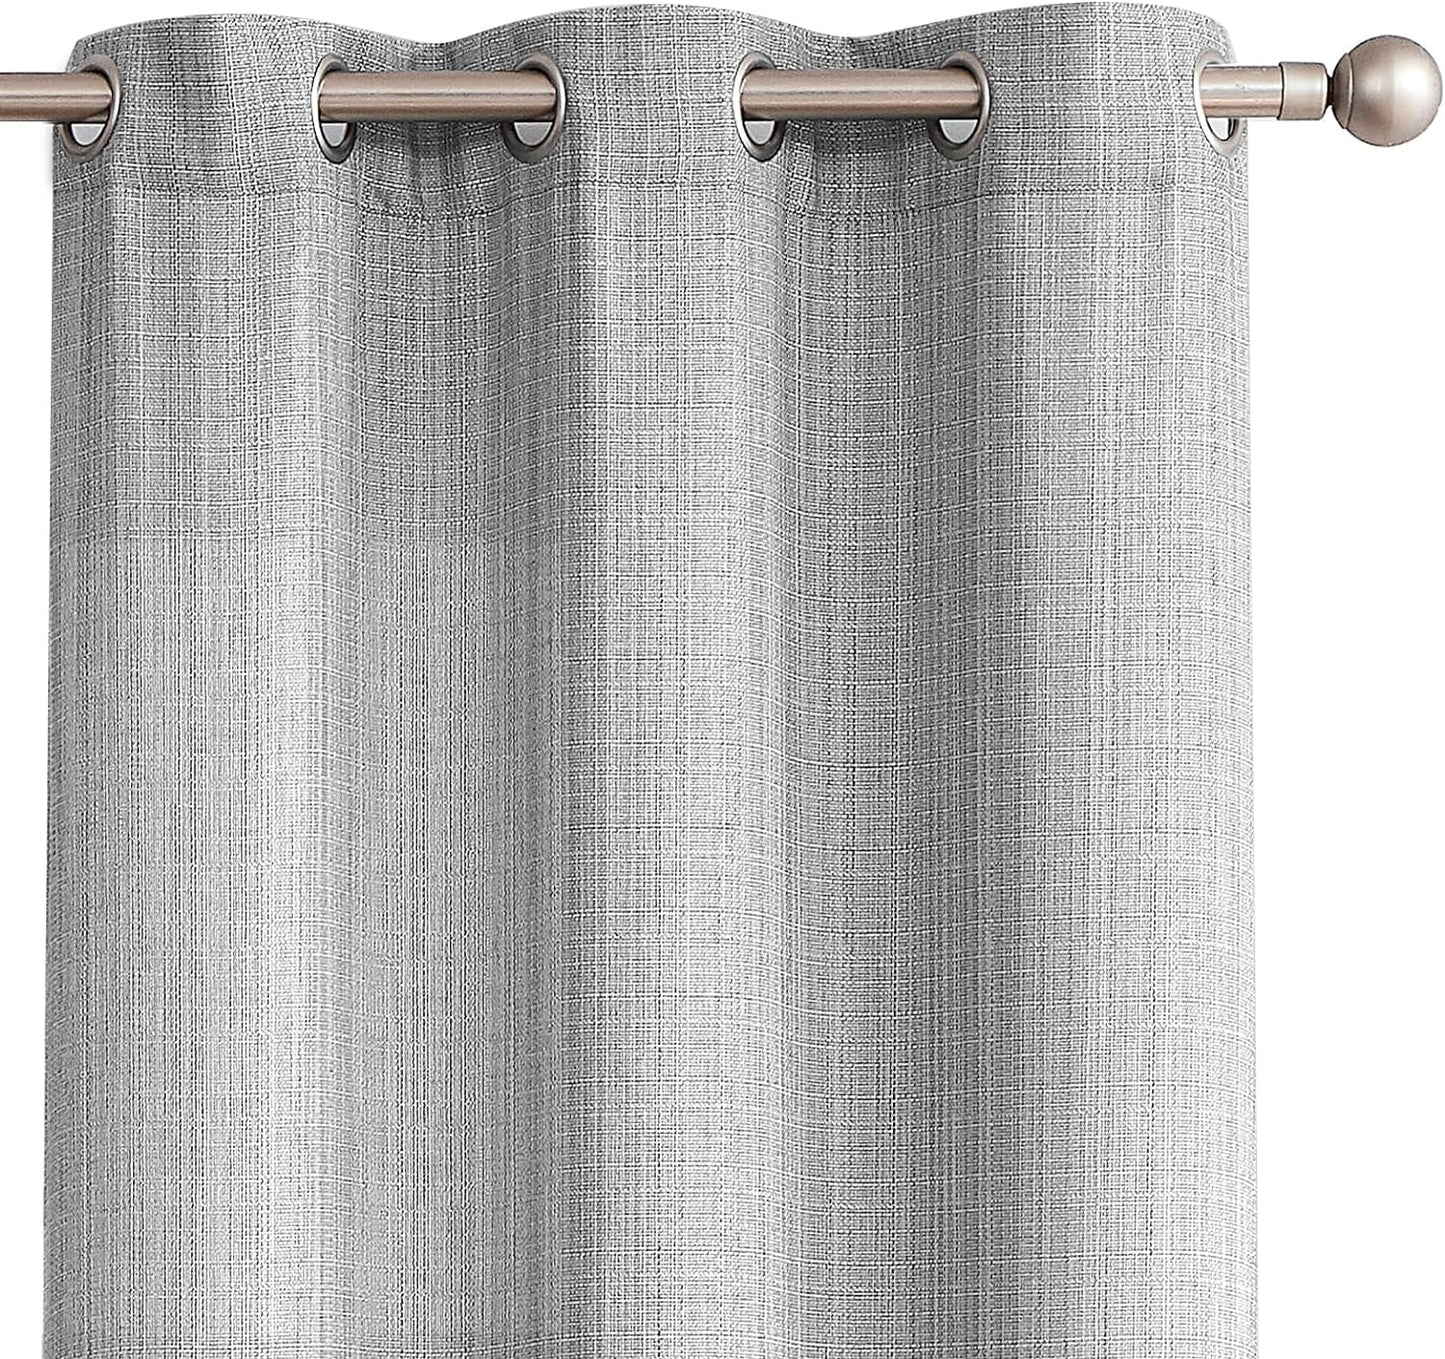 COLLACT White Linen Textured Curtains 84 Inch Length 2 Panels for Living Room Casual Weave Light Filtering Semi Sheer Curtains & Drapes for Bedroom Grommet Top Window Treatments, W38 X L84, White  COLLACT Grommet | Heathered Grey W38 X L72 